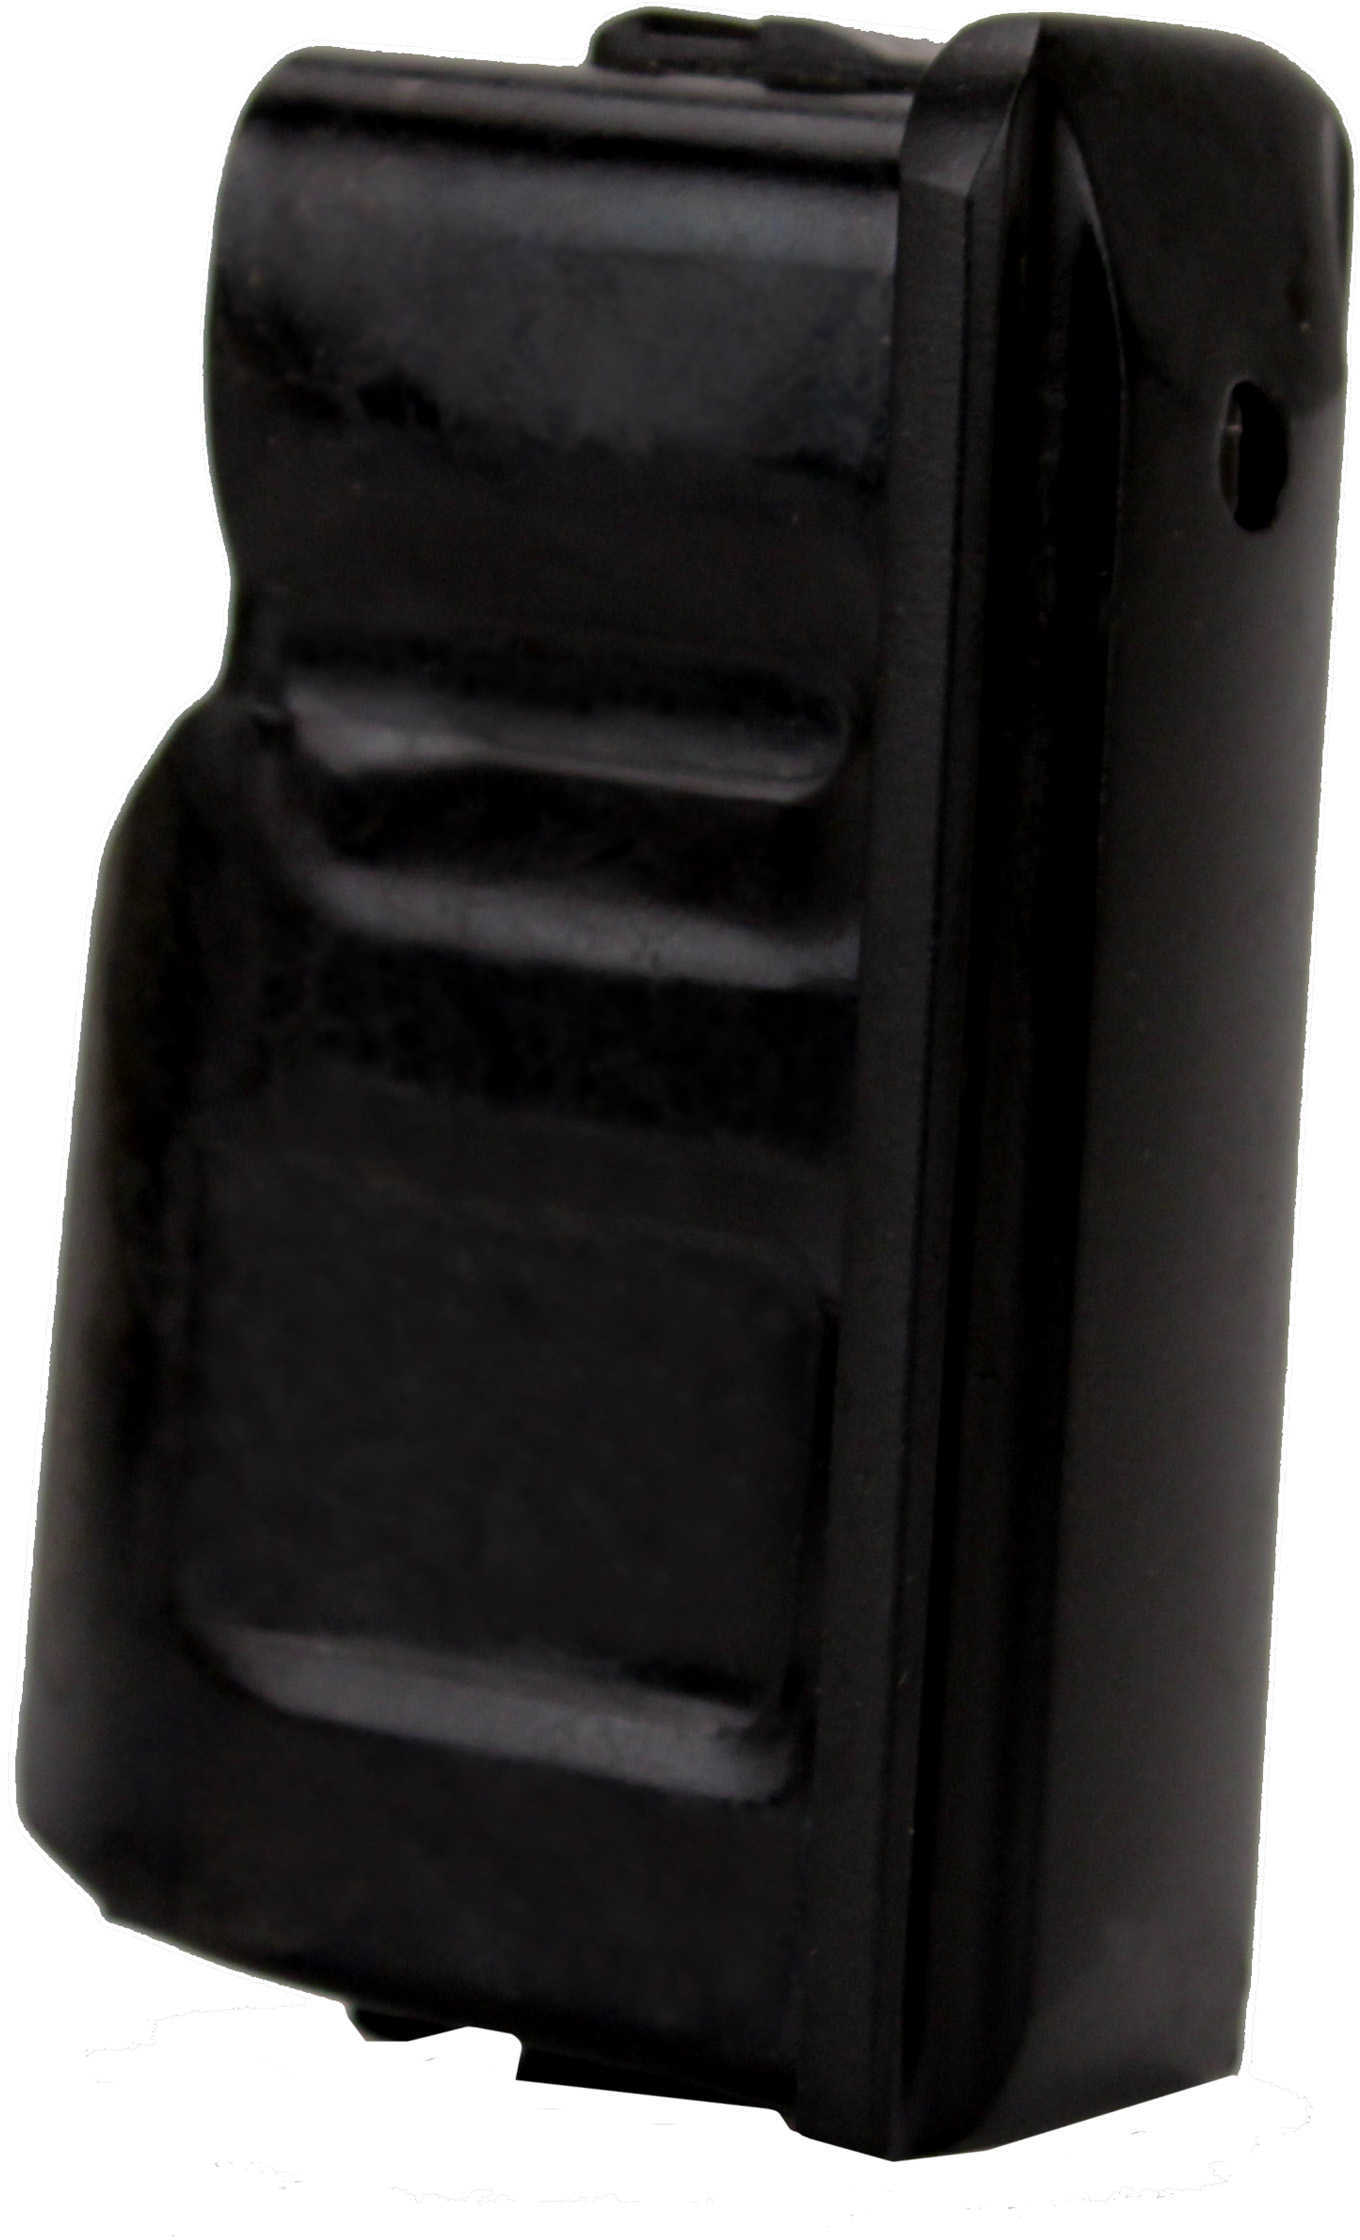 CZ USA 4 Round 308 Winchester Model 550 Magazine With Steel Finish Md: 14002